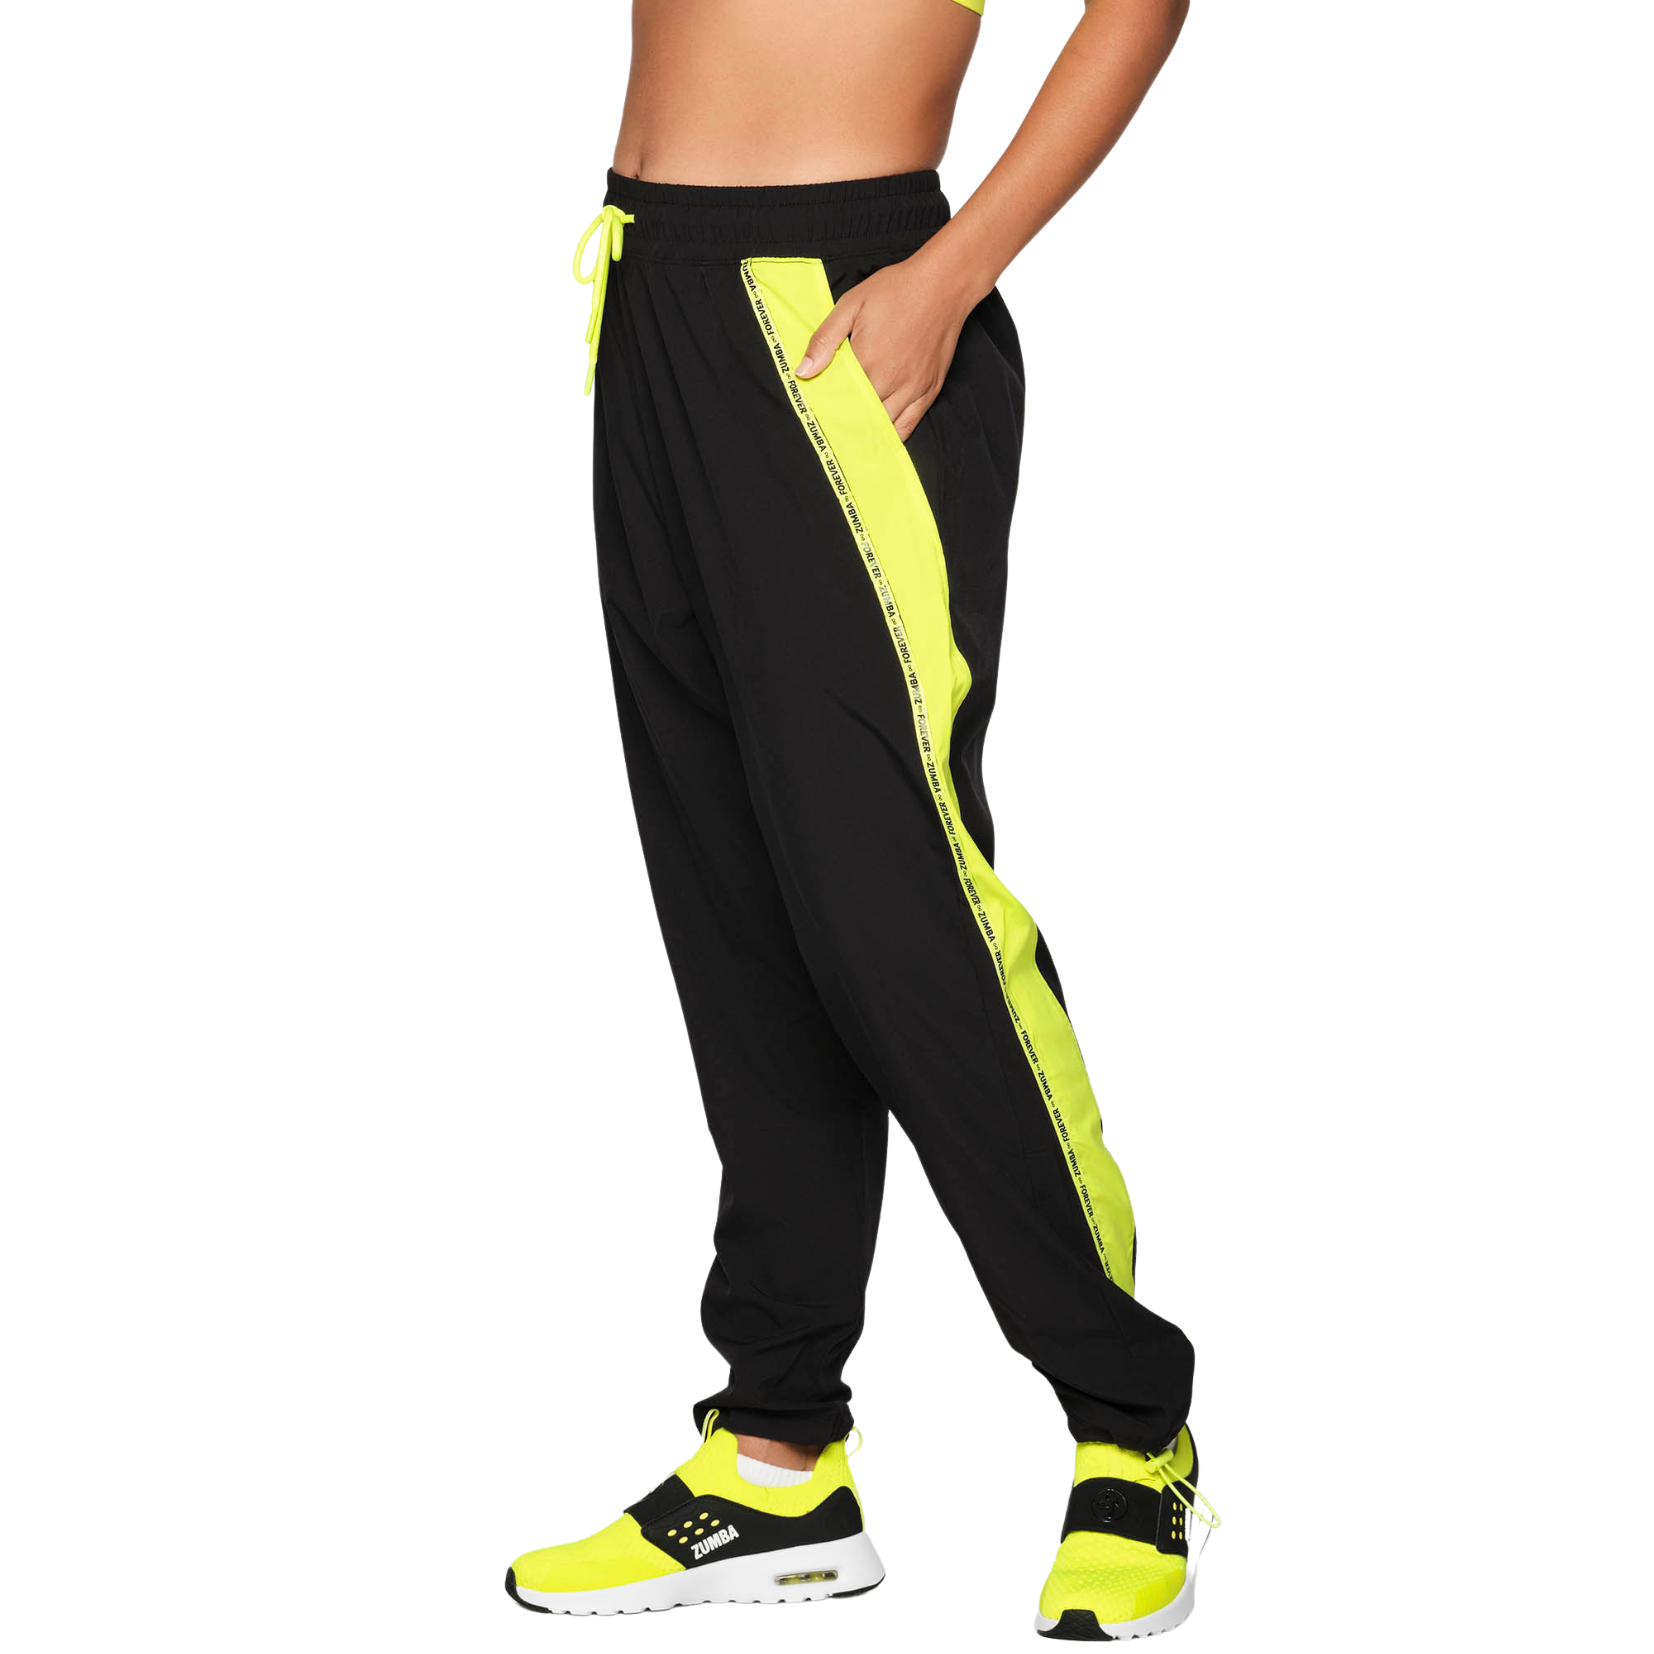 Zumba Forever Panel Track Pants (Special Order)